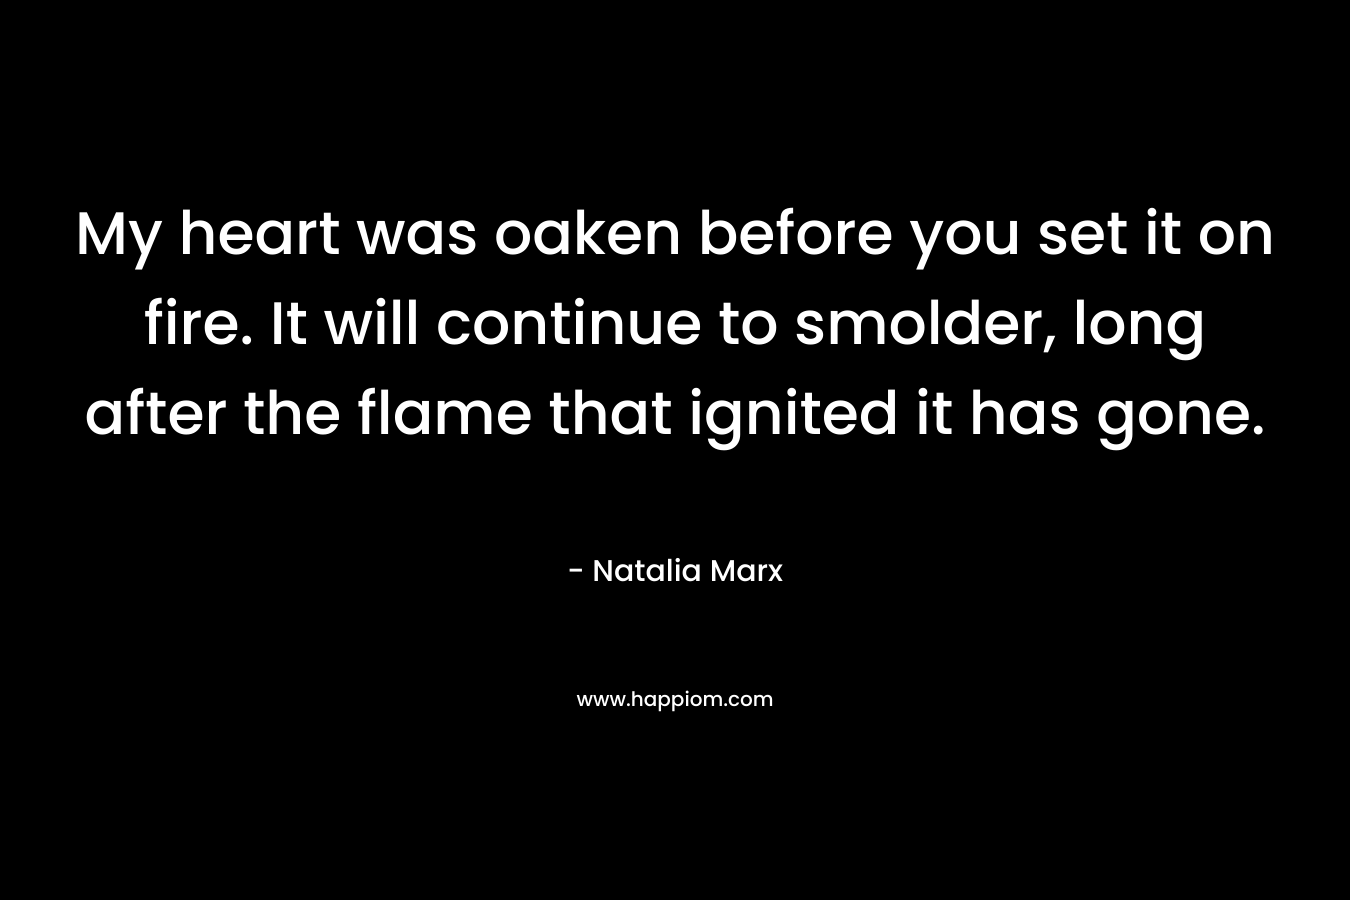 My heart was oaken before you set it on fire. It will continue to smolder, long after the flame that ignited it has gone. – Natalia Marx